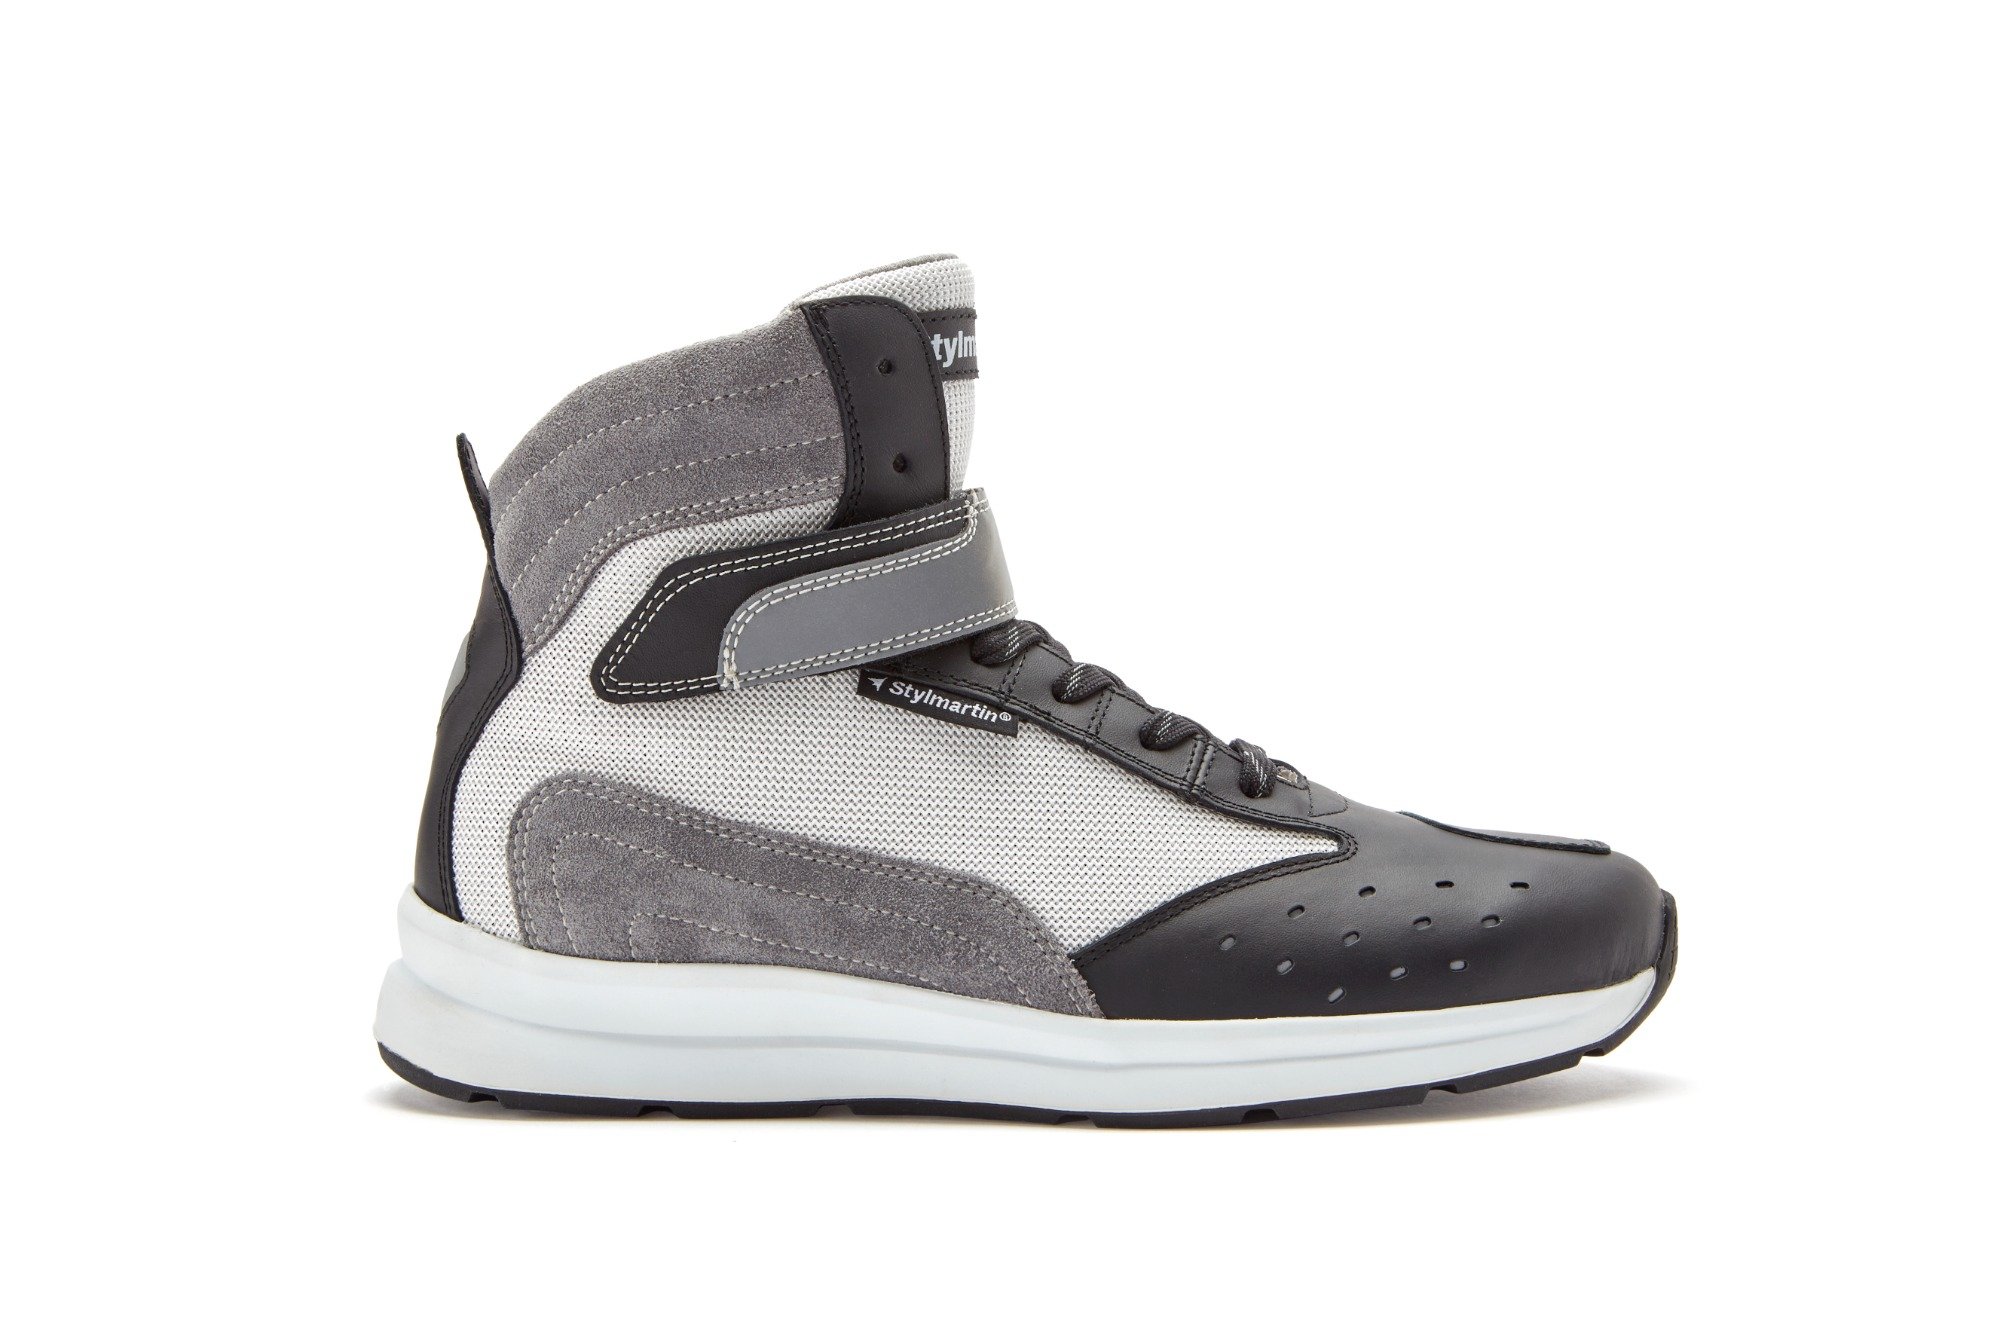 Image of Stylmartin Audax Air Black Anthracite White Size 42 ID 1000001309347